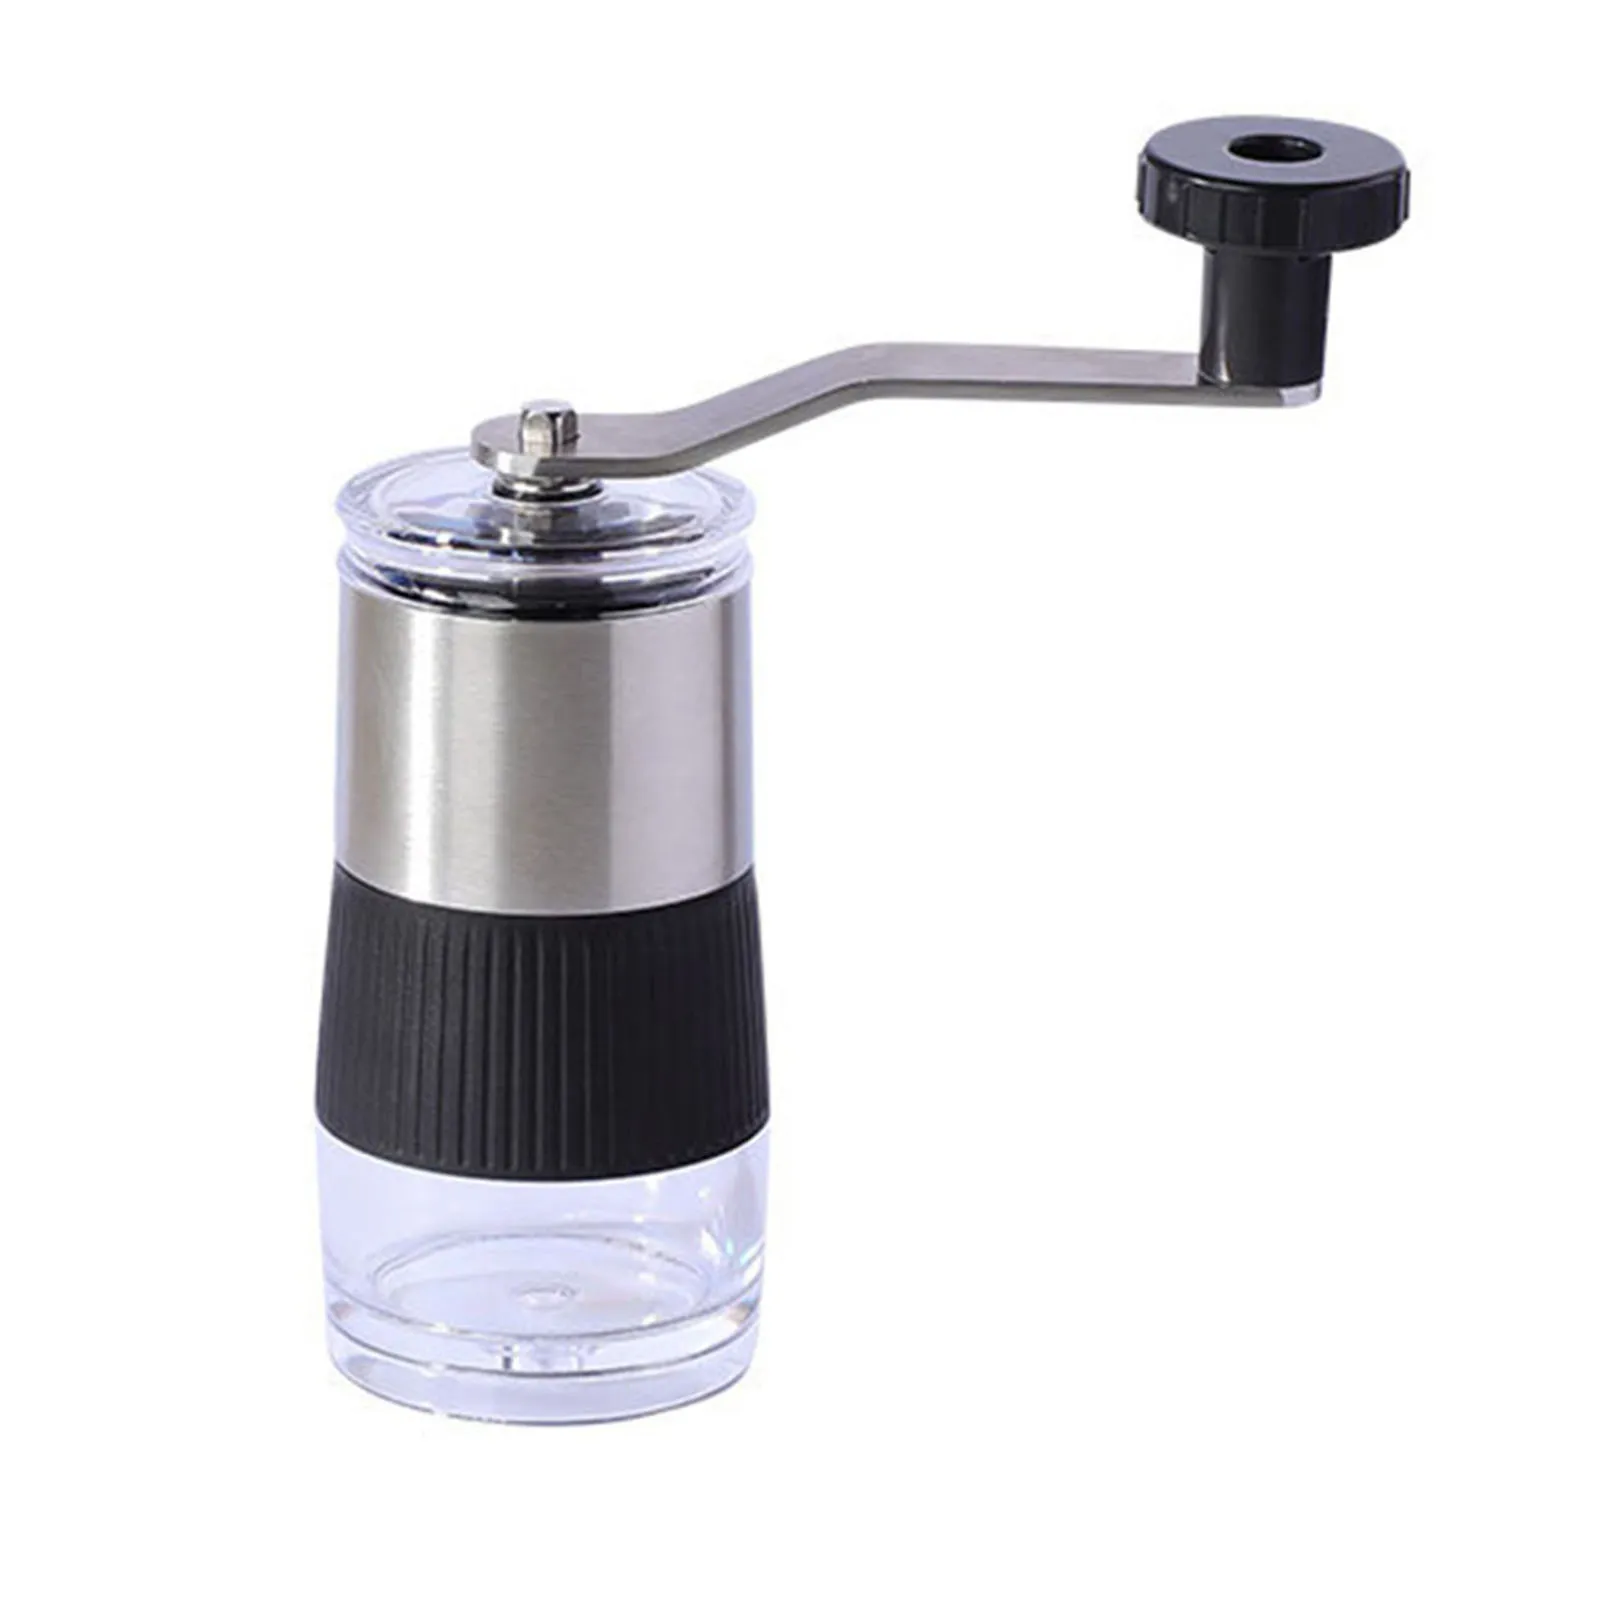 

Handheld Coffee Grinder Adjustable Grinding Fineness Removable Handle Convenient Lid Perfect for Travel Camping or Hiking